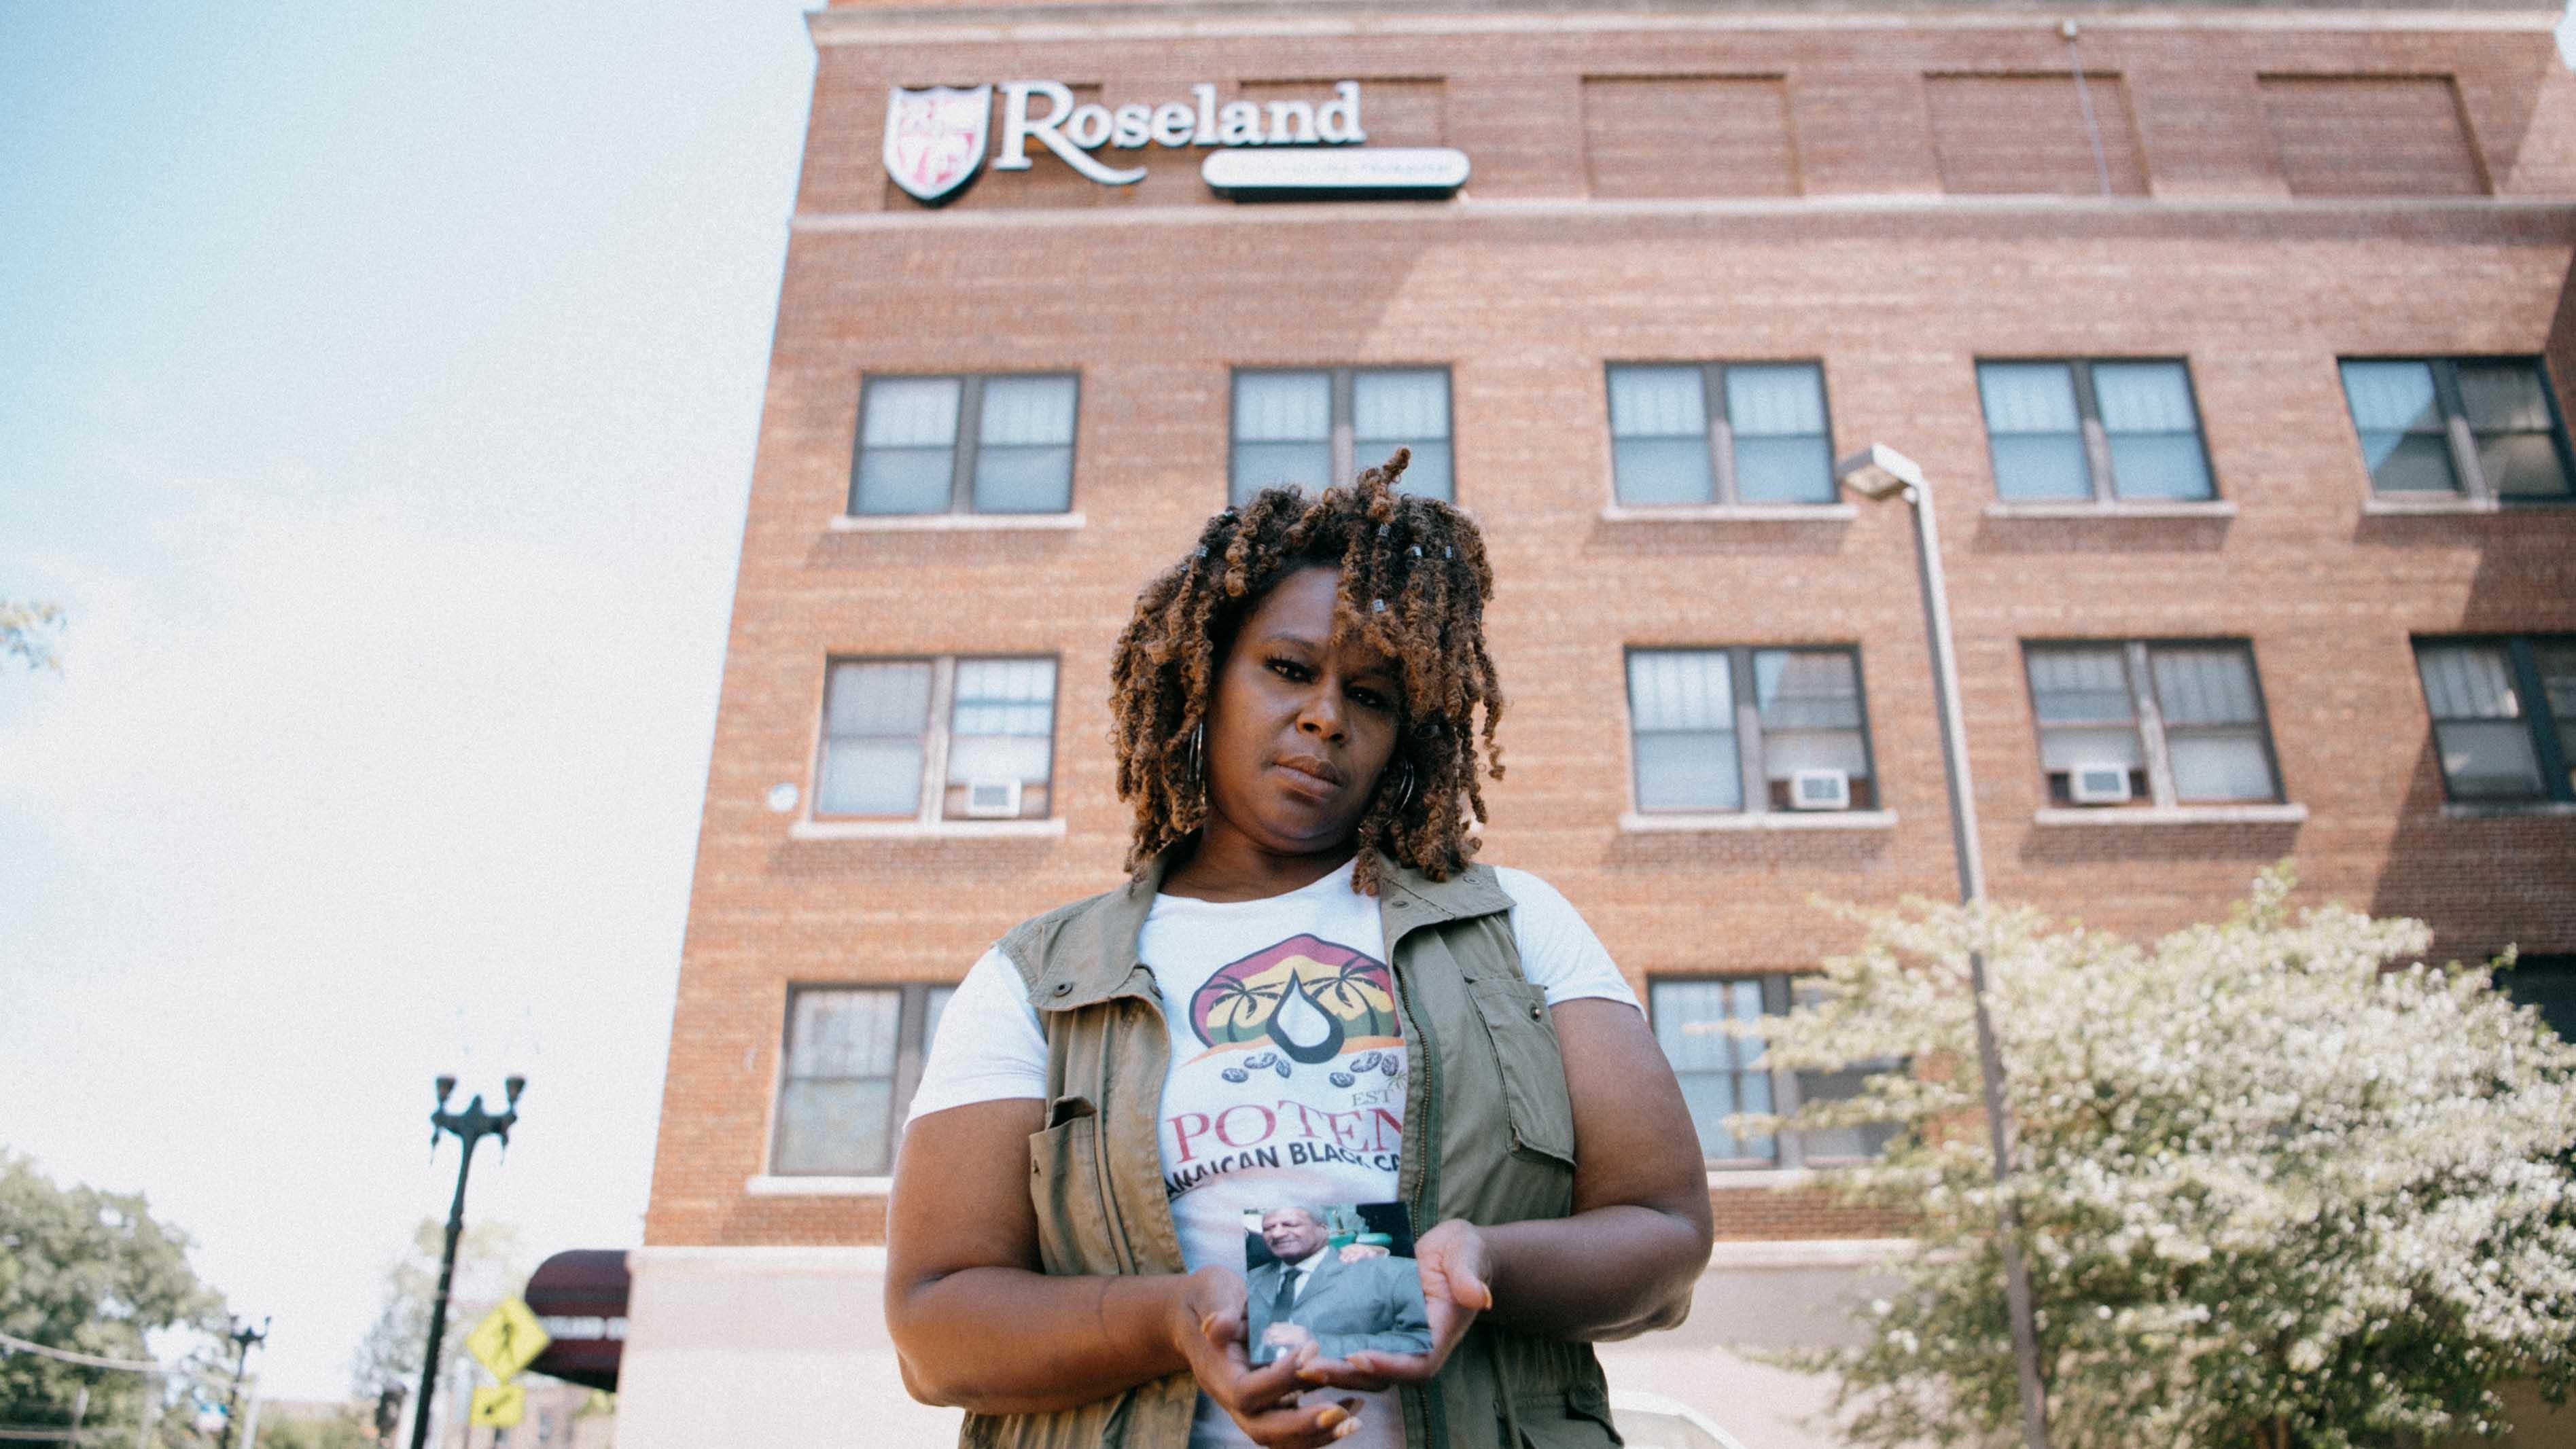 Melichsia Boss, holding a photograph of her father, Wilford. (Akilah Townsend for ProPublica)